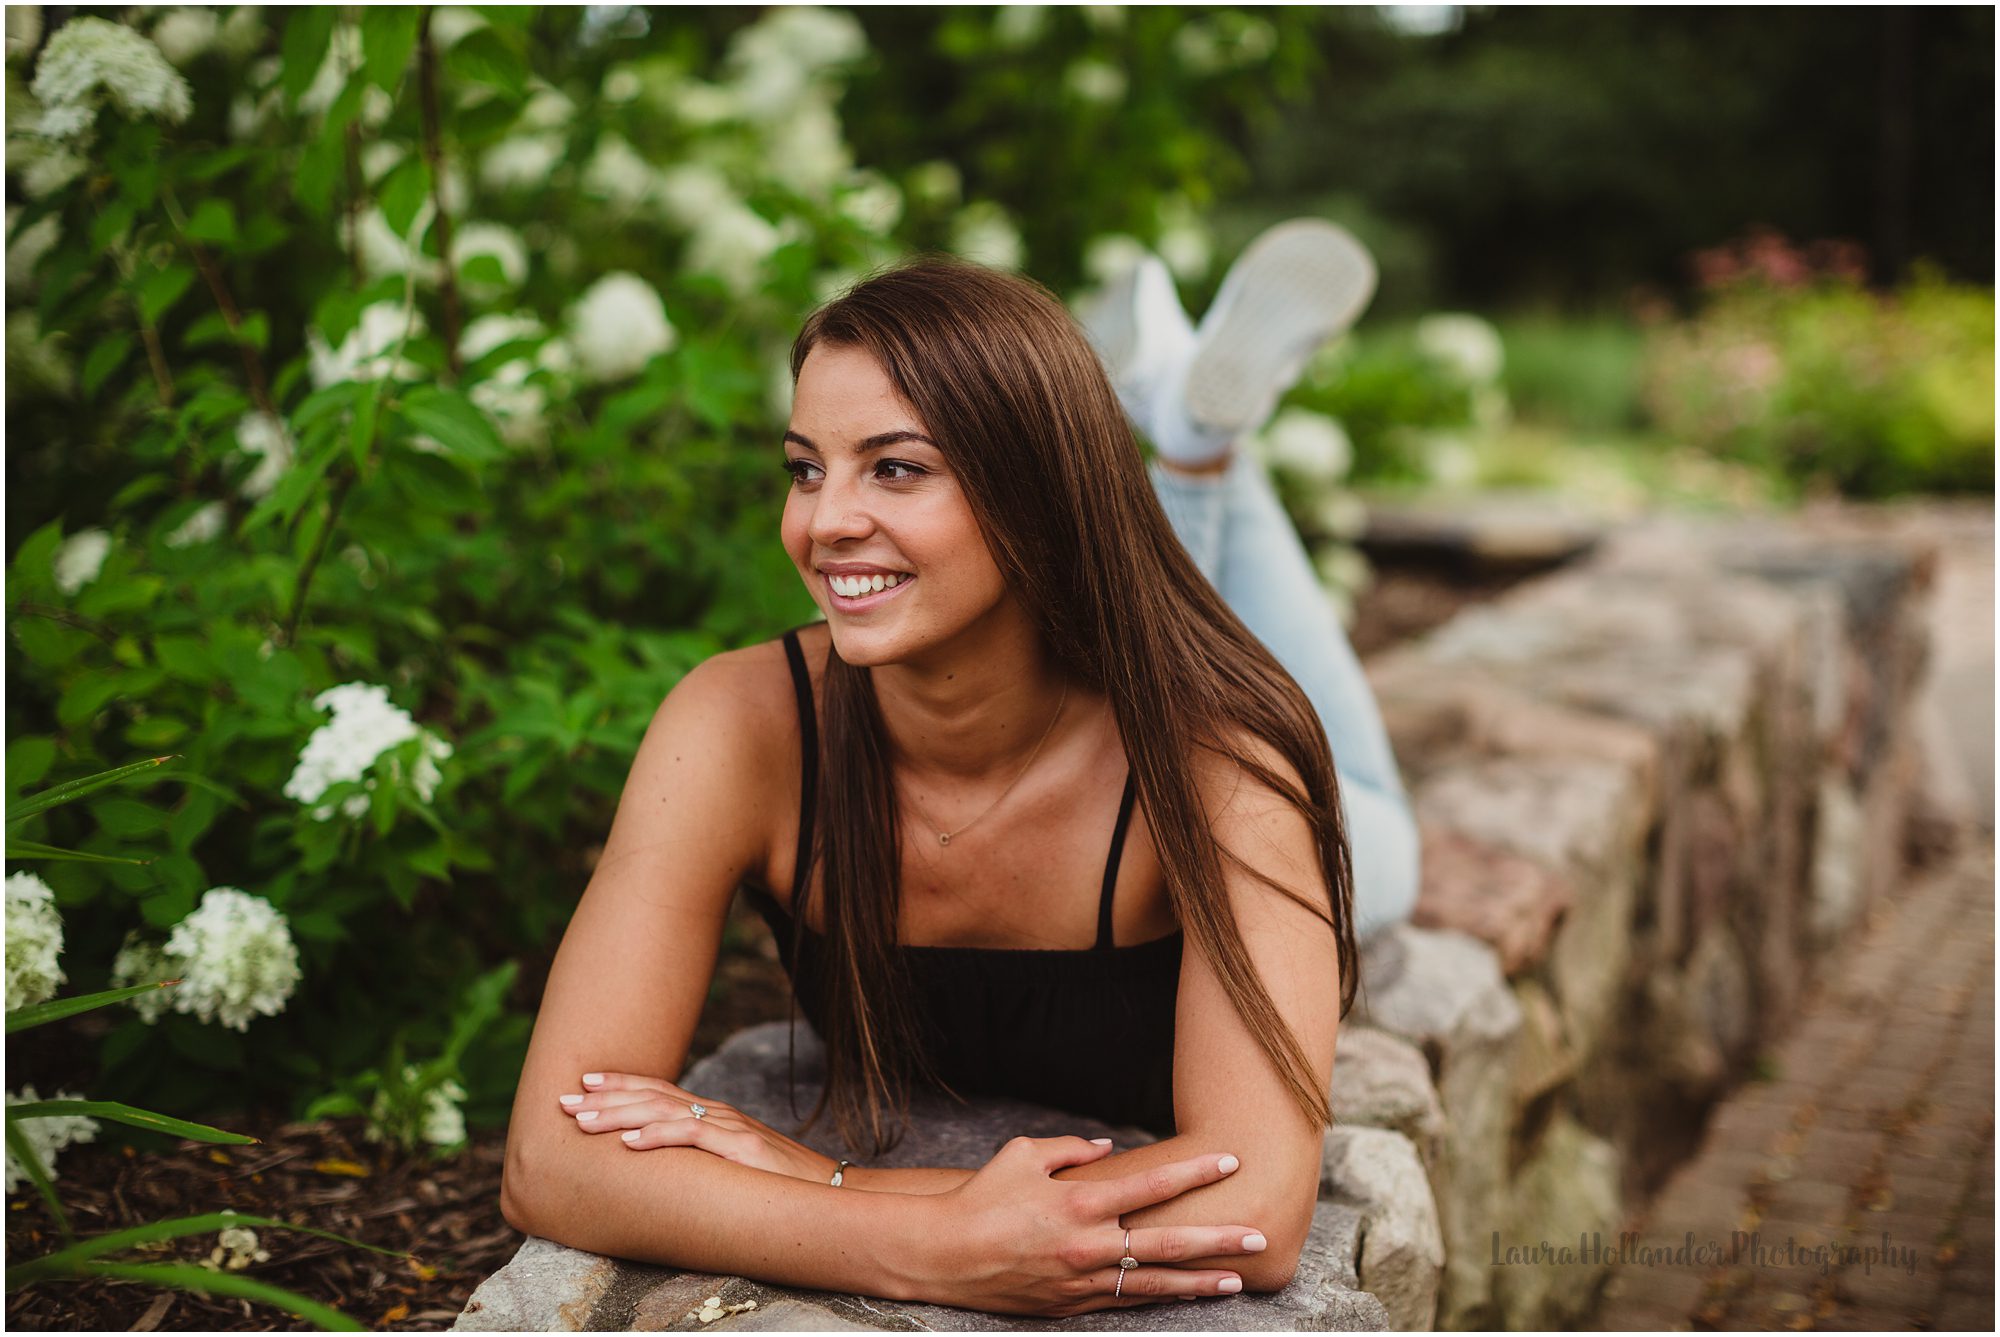 modern senior girl portraits in downtown park setting southest michigan with laura hollander photography